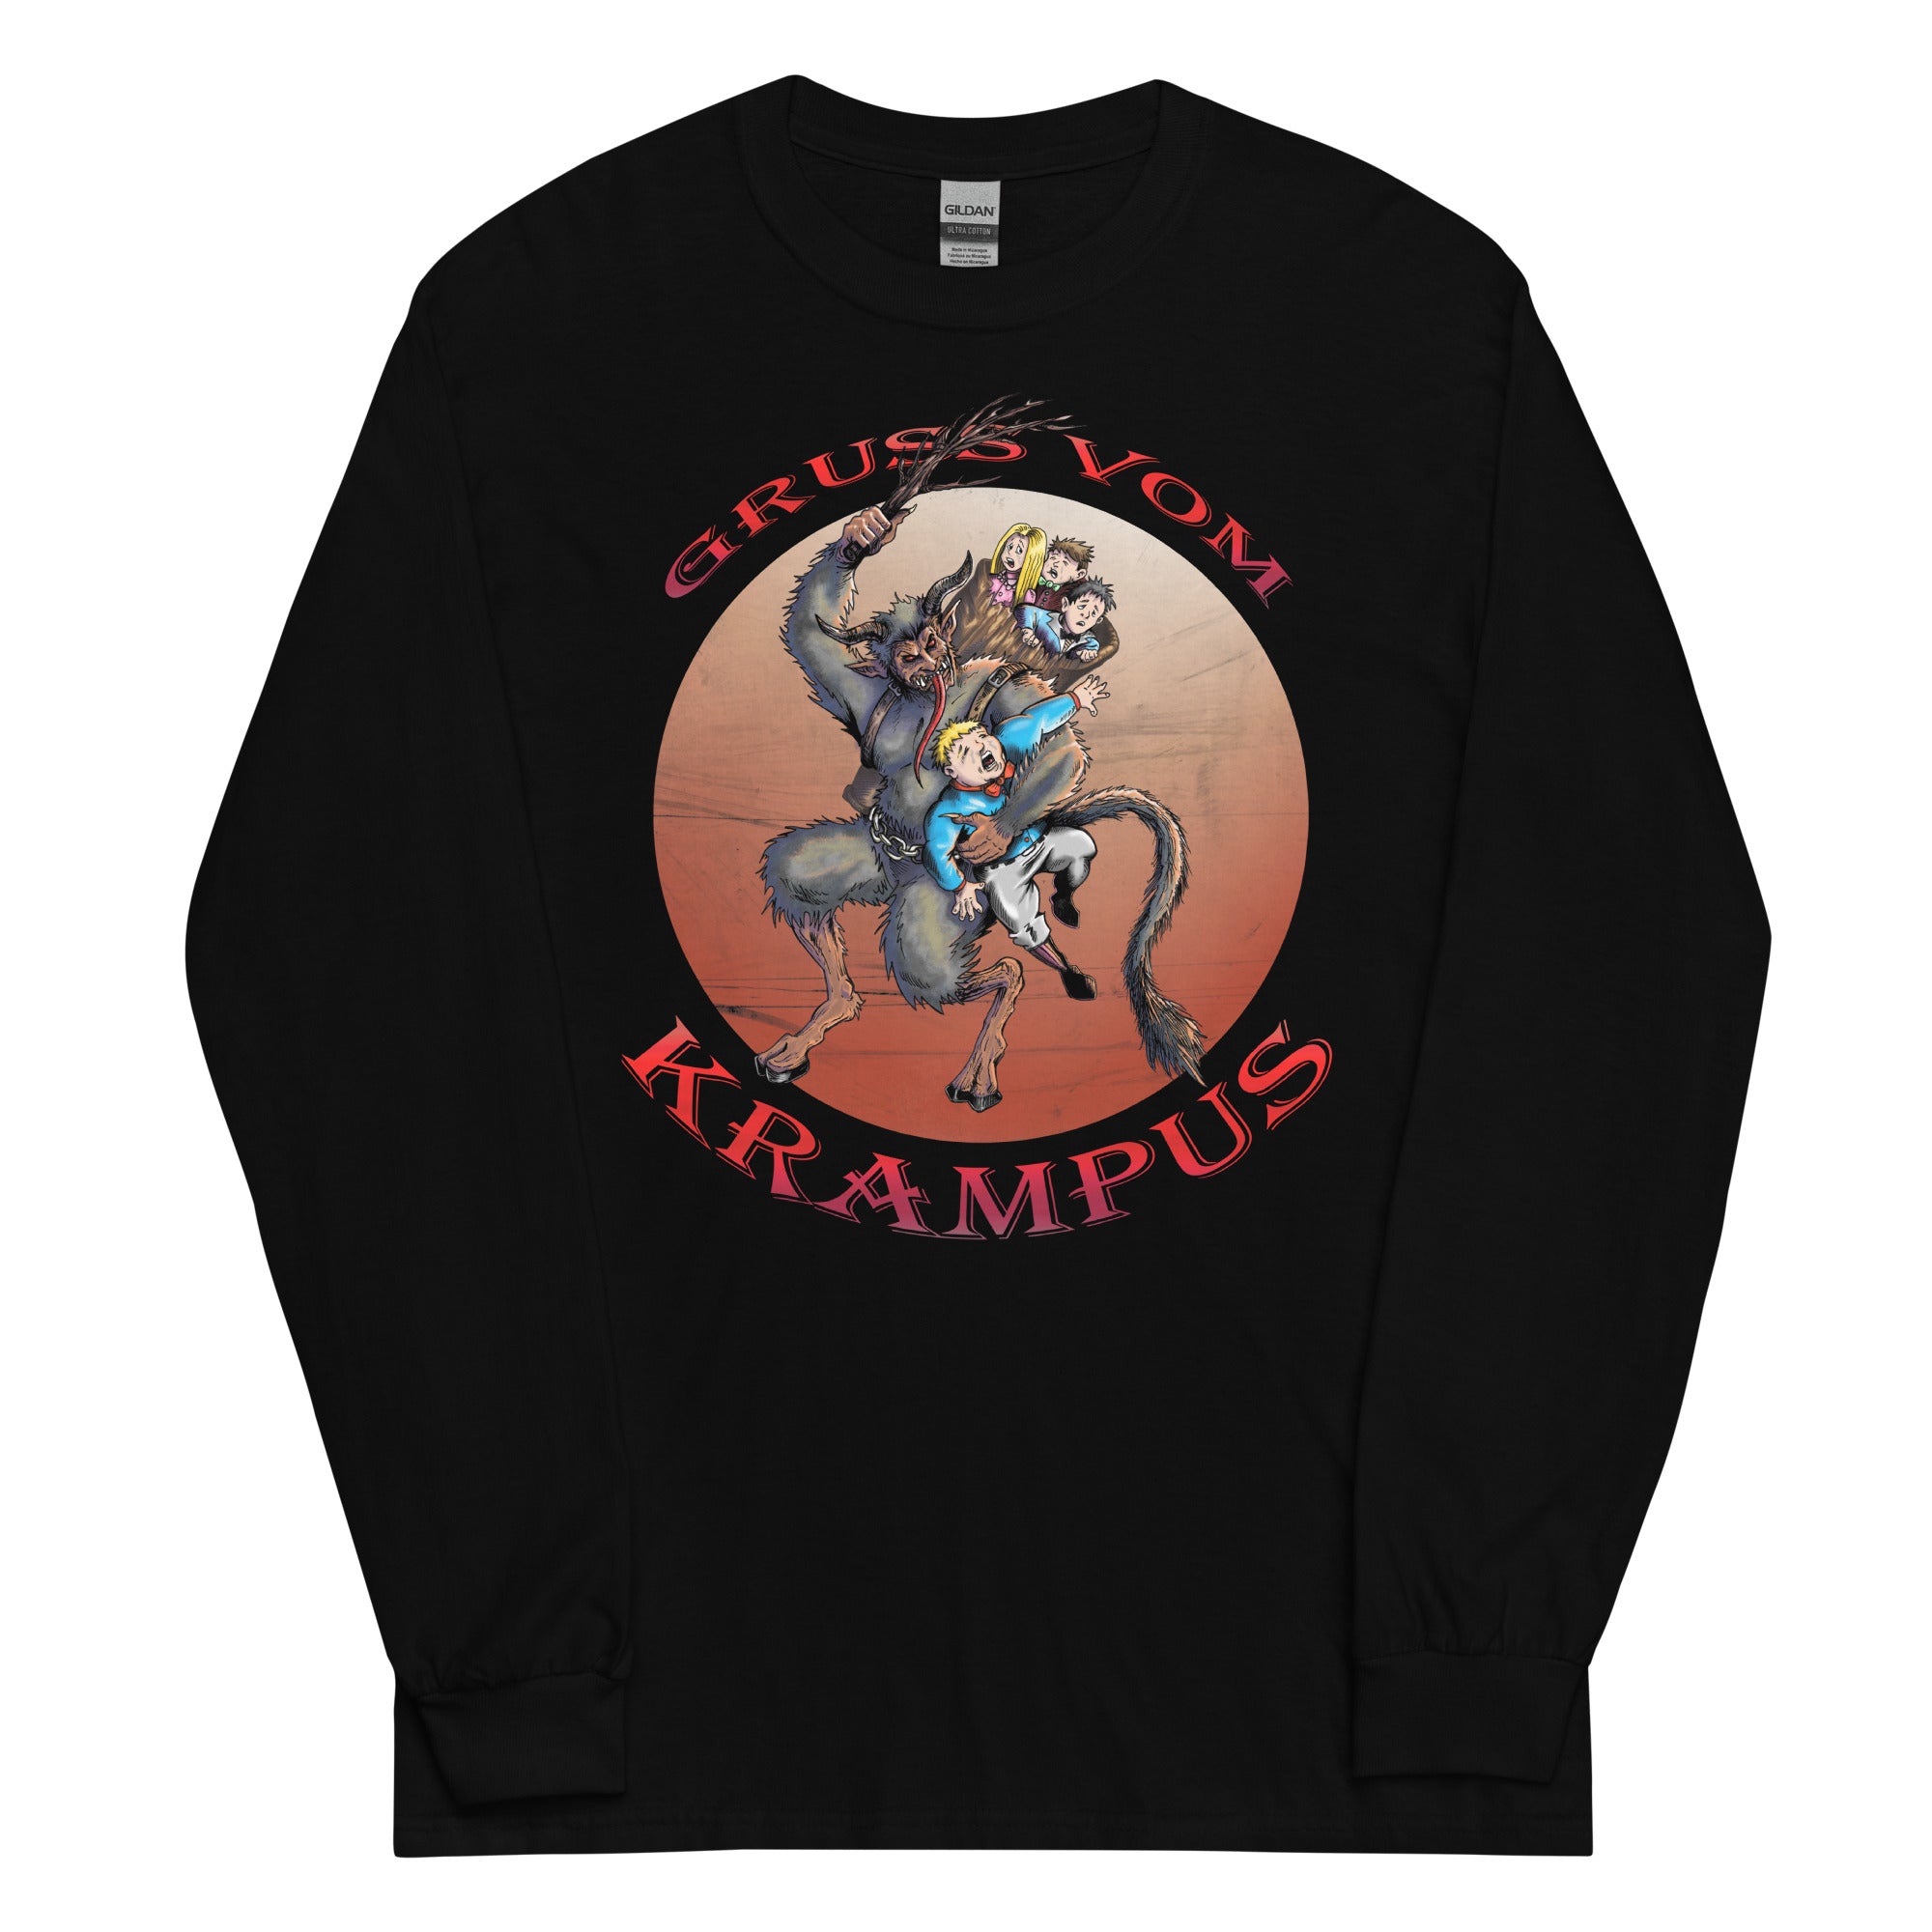 Gruss Vom Krampus Greetings and Merry Christmas Long Sleeve Shirt - Edge of Life Designs